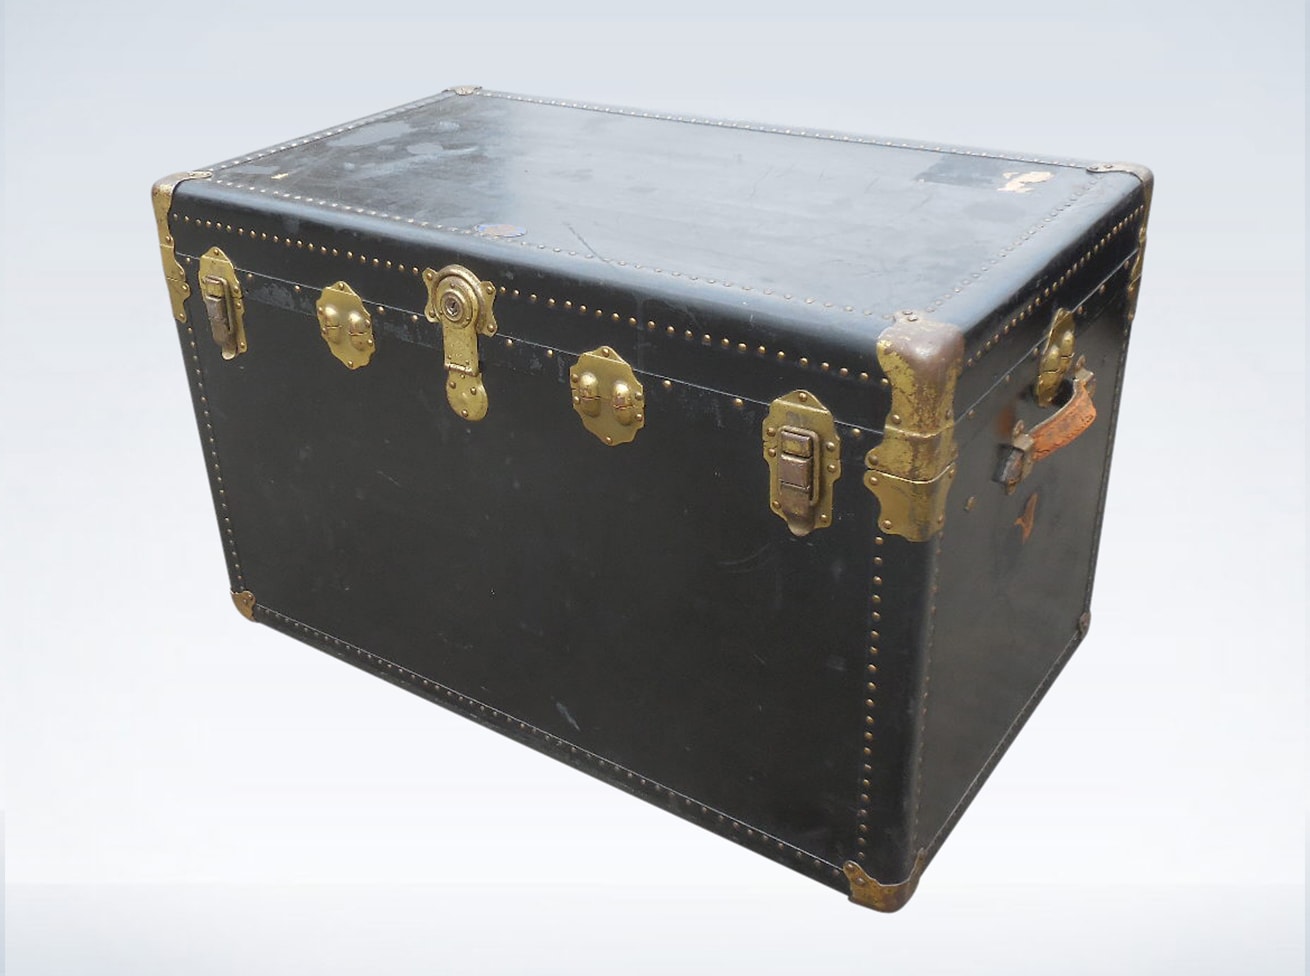 Antique Trunks, Chests & Suitcases